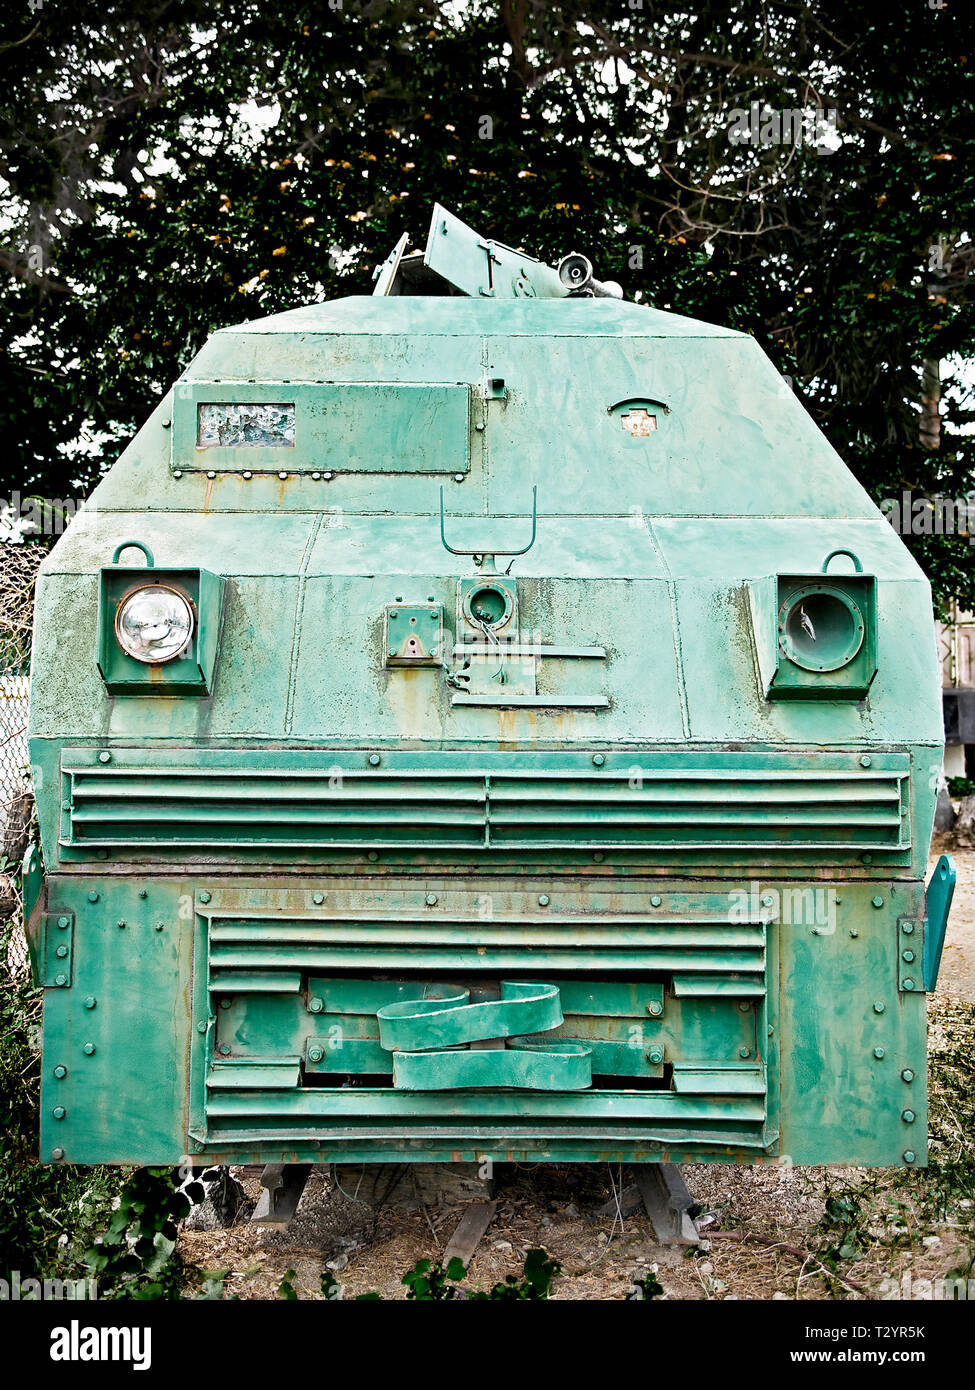 Monument of an antique armored tank train located next to Hua Lamphong Train Station in Bangkok, Thailand Stock Photo